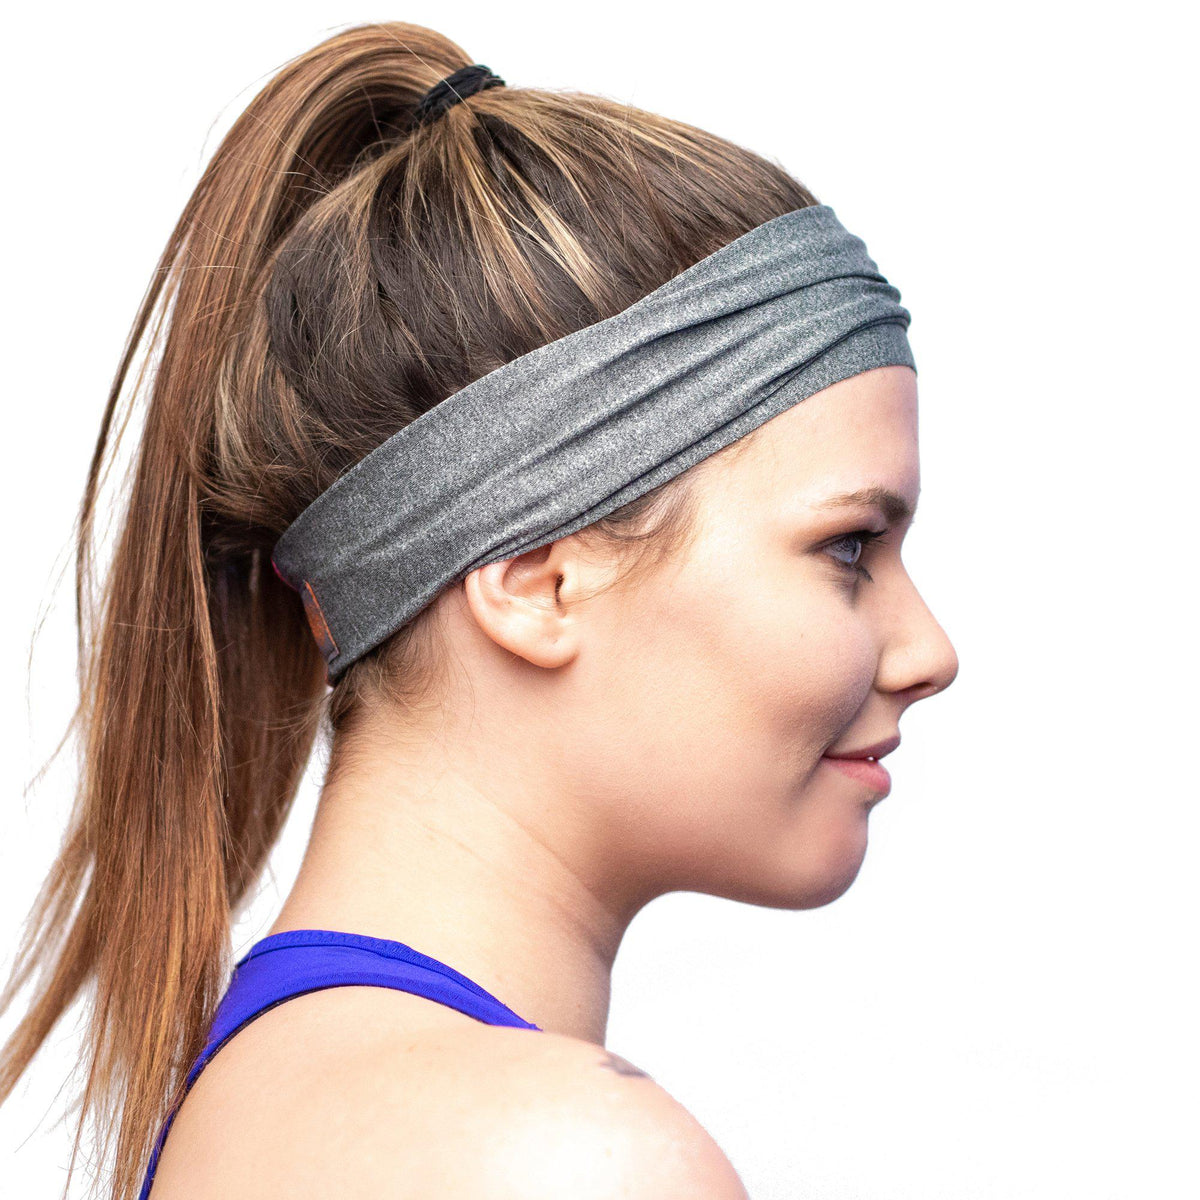 Lightweight Sports Headband - The Rosella Racer - Red Dust Active